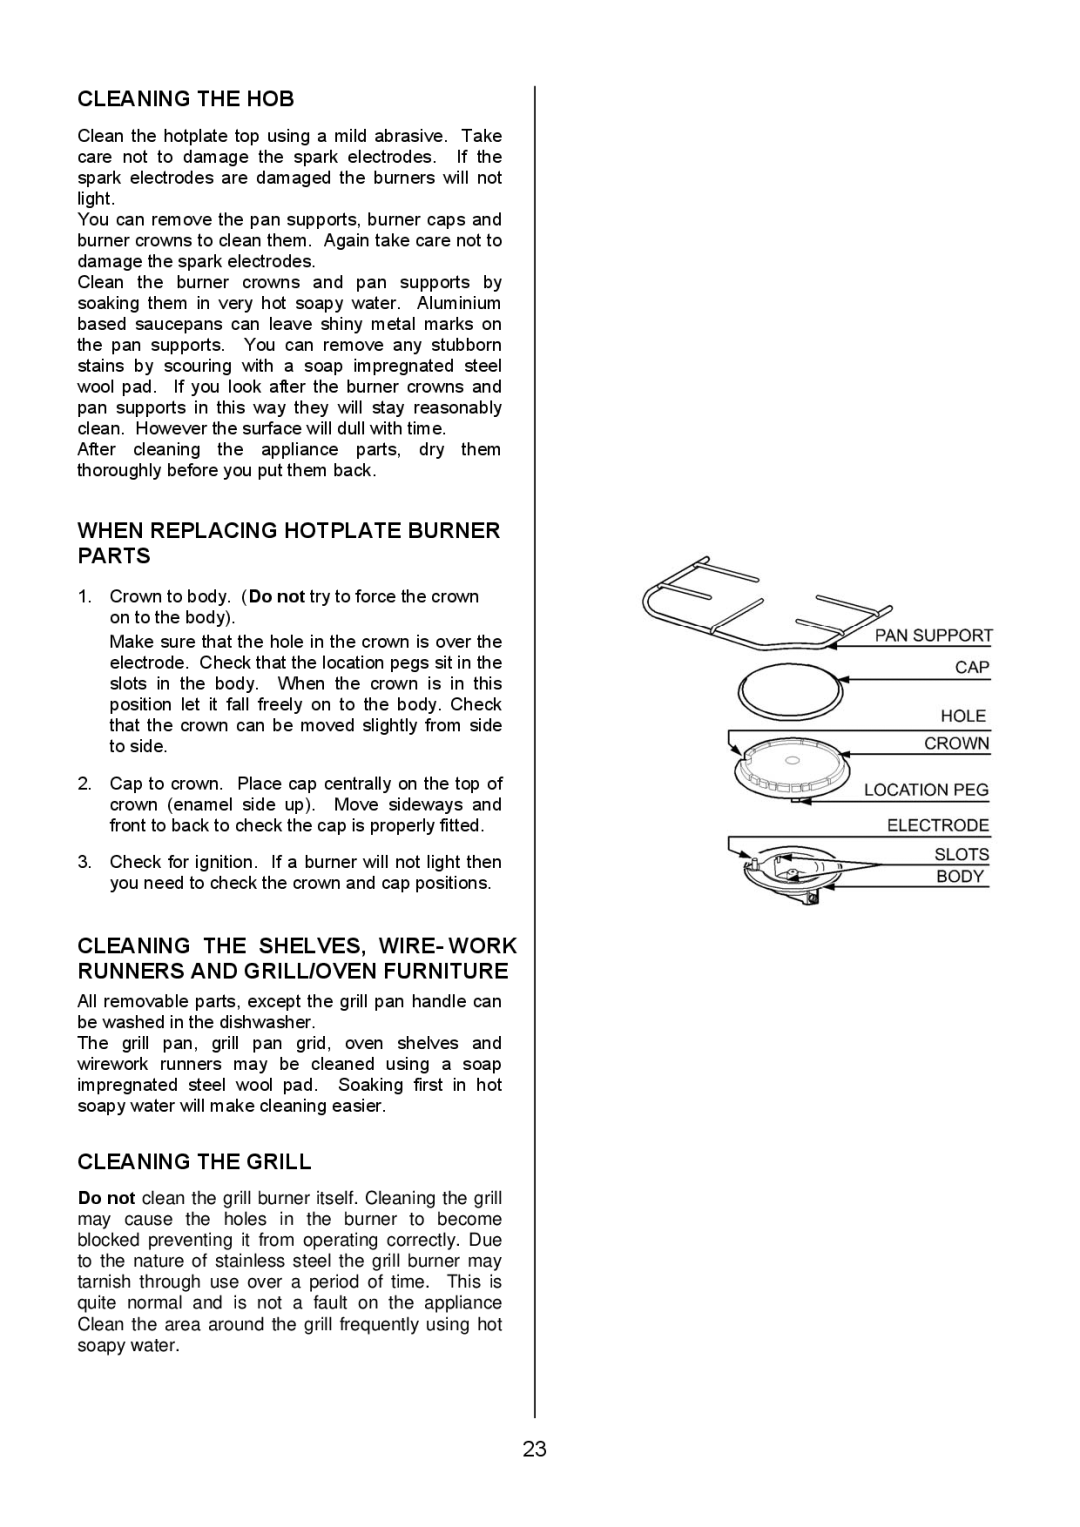 Electrolux EKG5547, EKG5546 user manual Cleaning the HOB, When Replacing Hotplate Burner Parts, Cleaning the Grill 